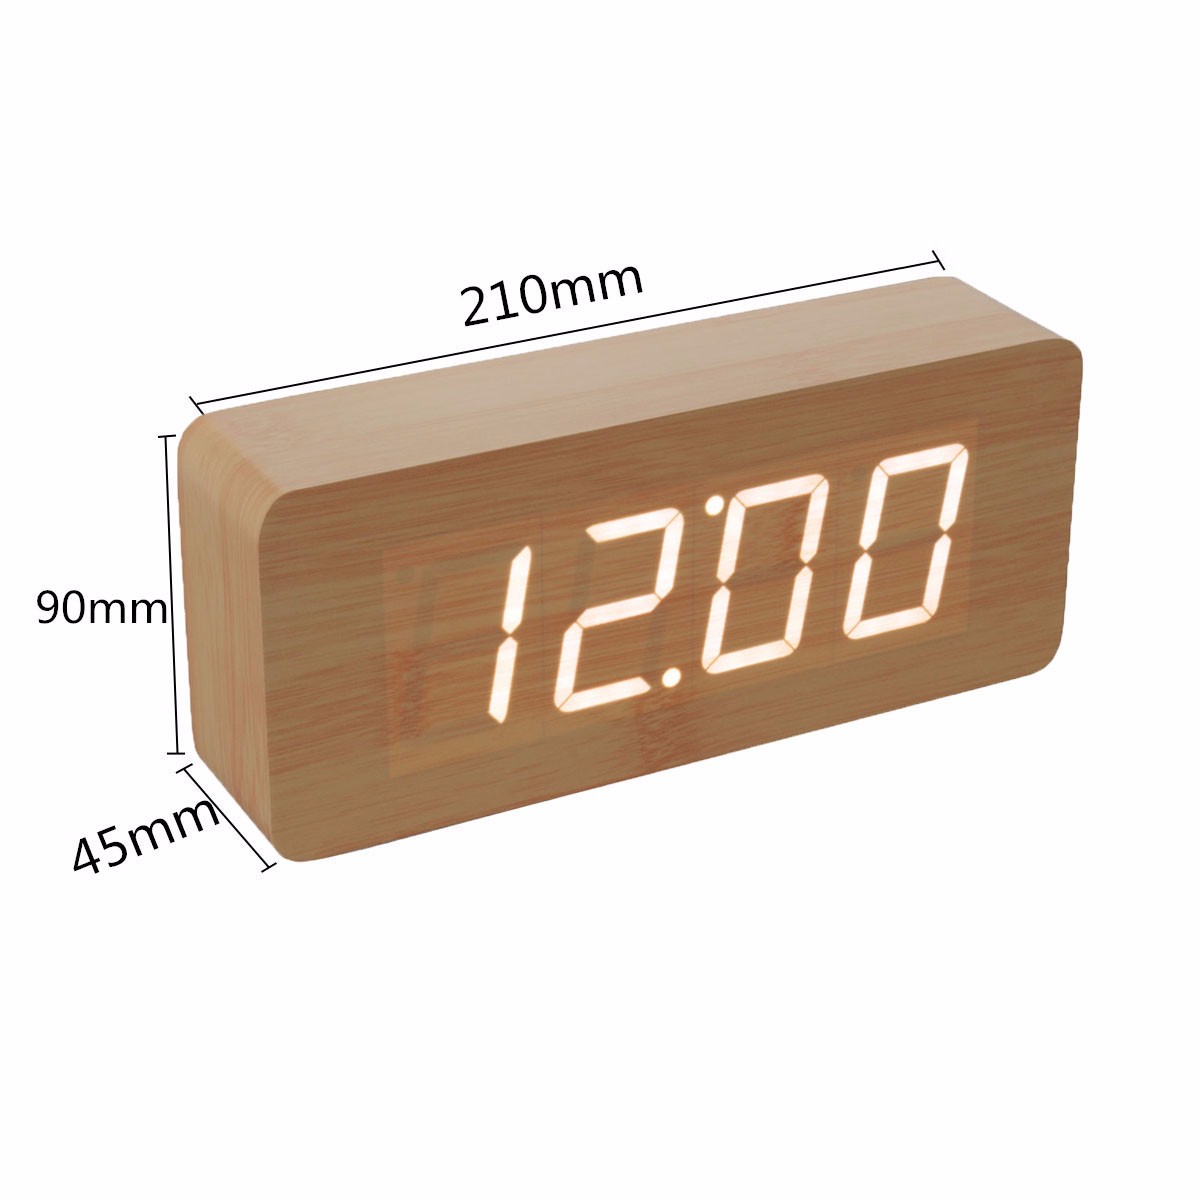 Multifunctional-Wooden-Digital-Clock-Two-Modes-Default-Display-Time-Built-in-Battery-Voice-Control-S-1891907-9